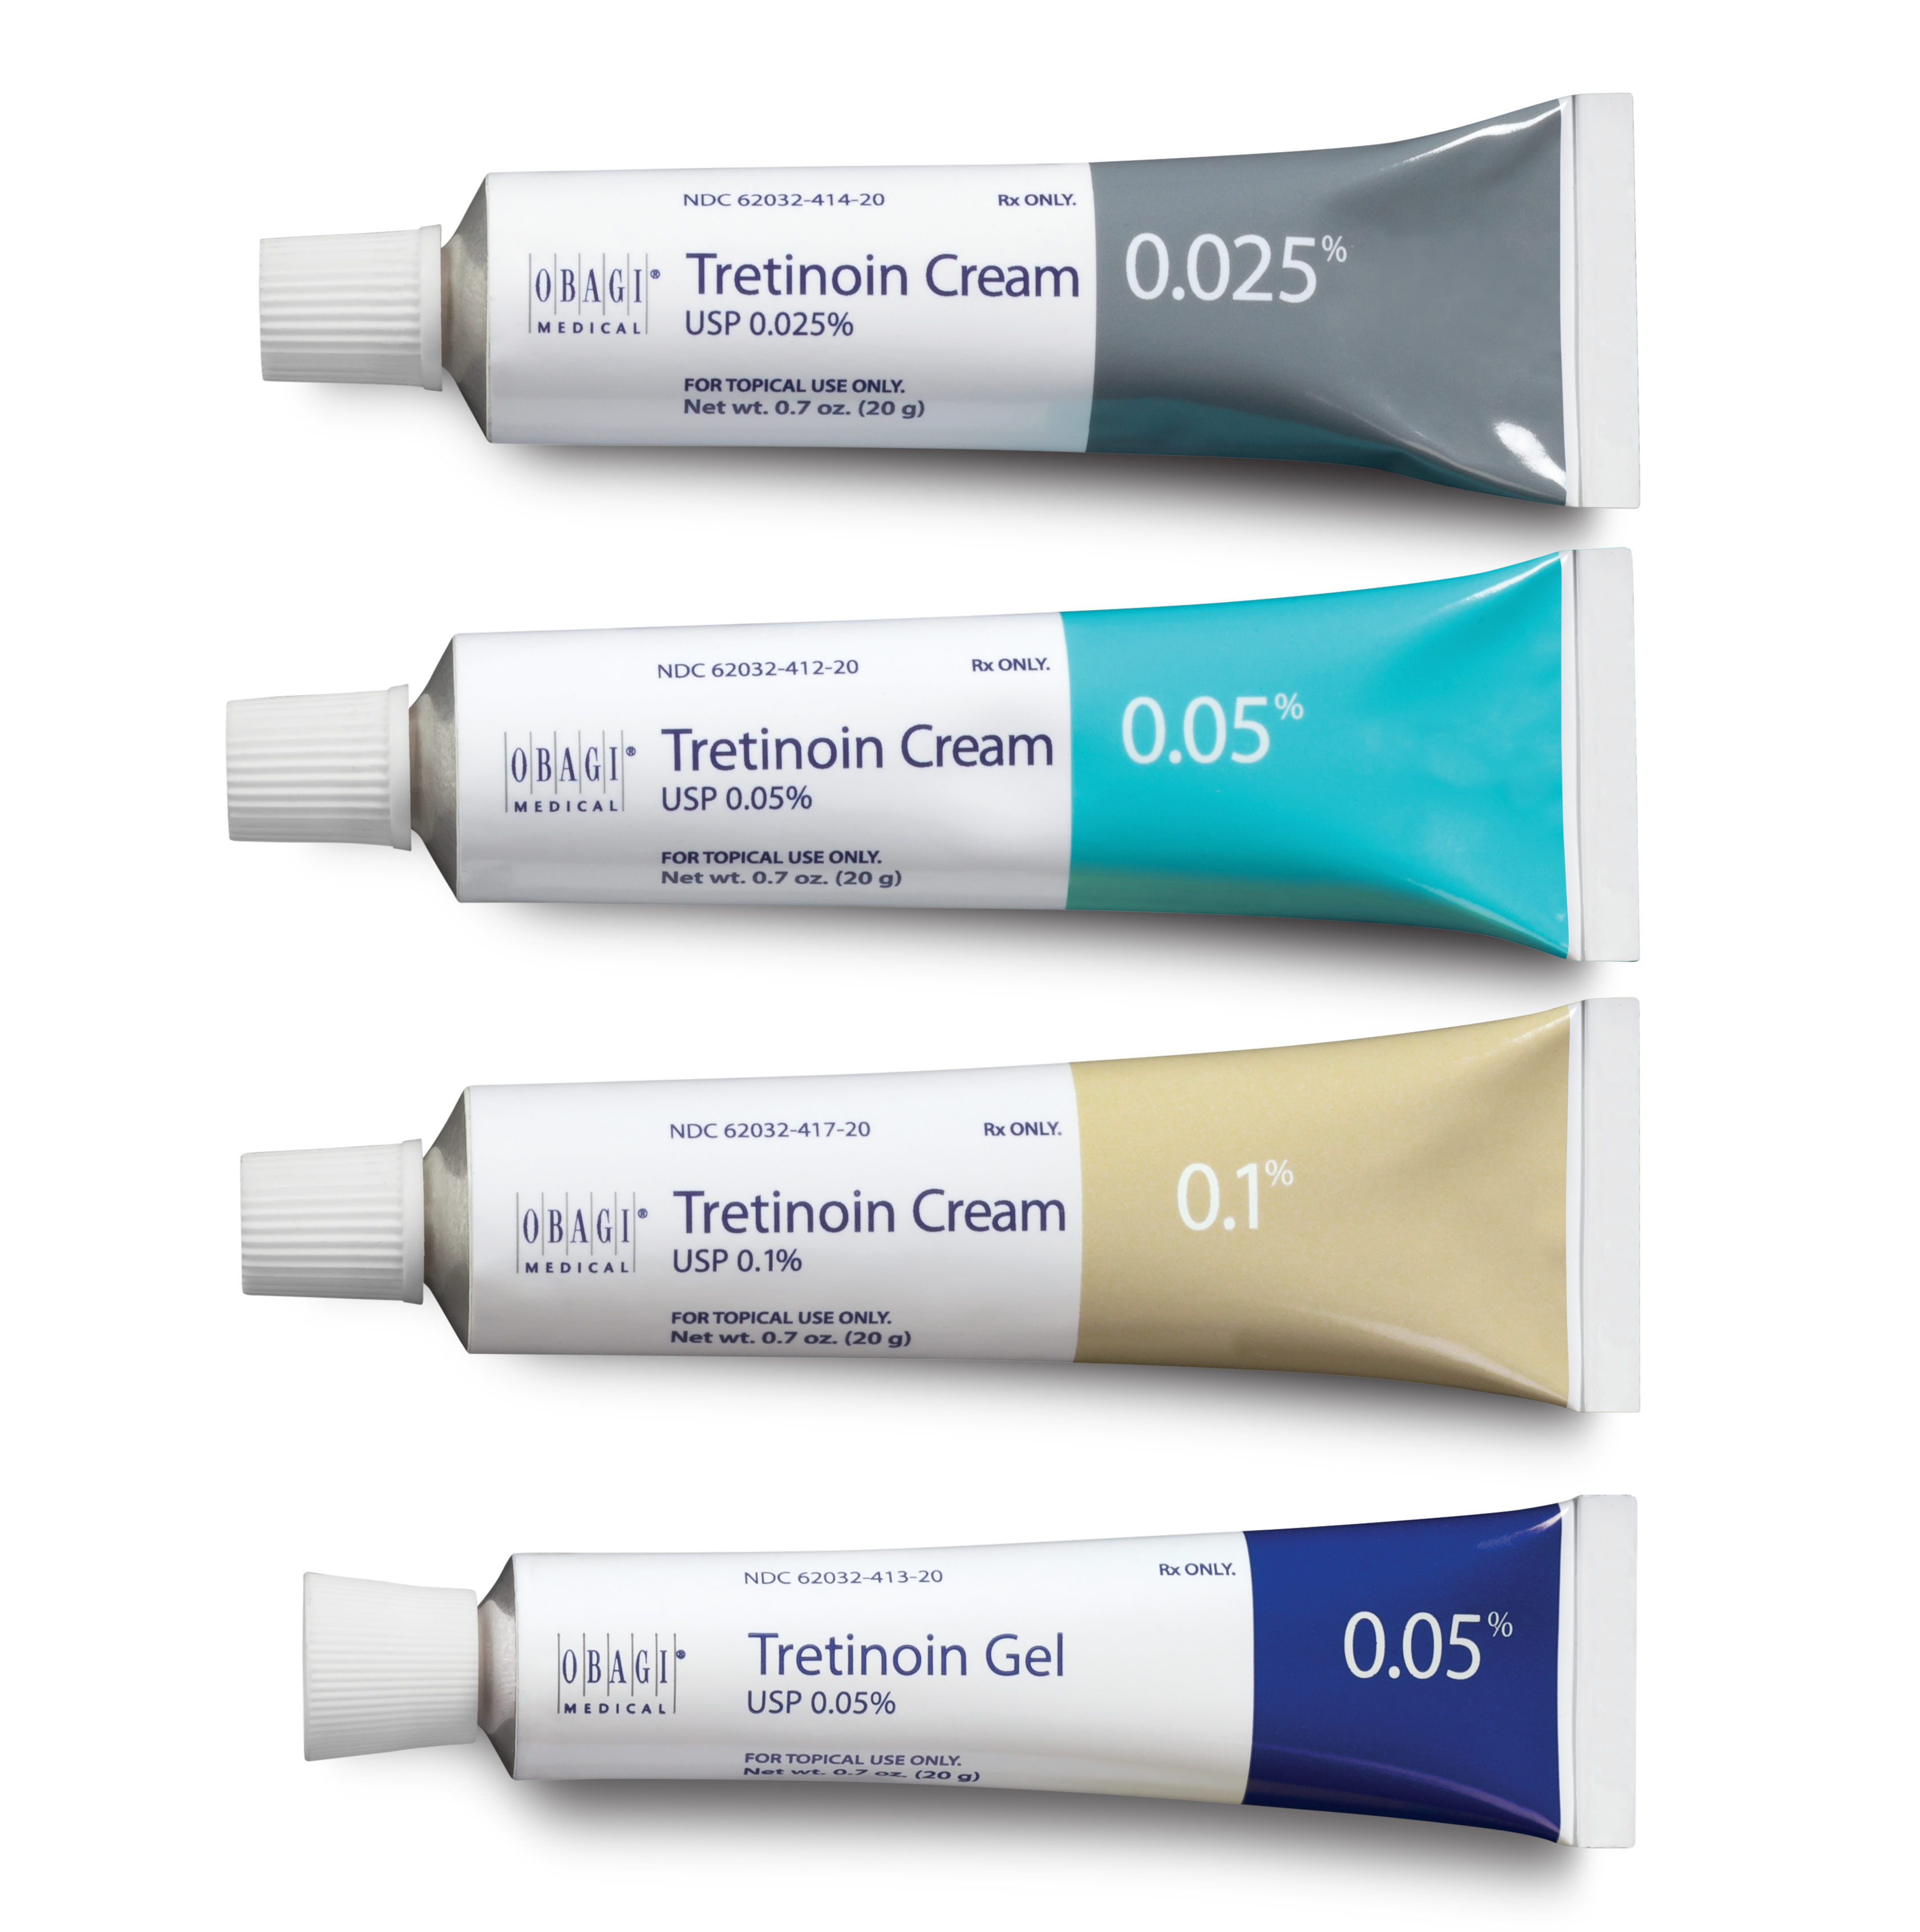 Tretinoin is a double-edged sword